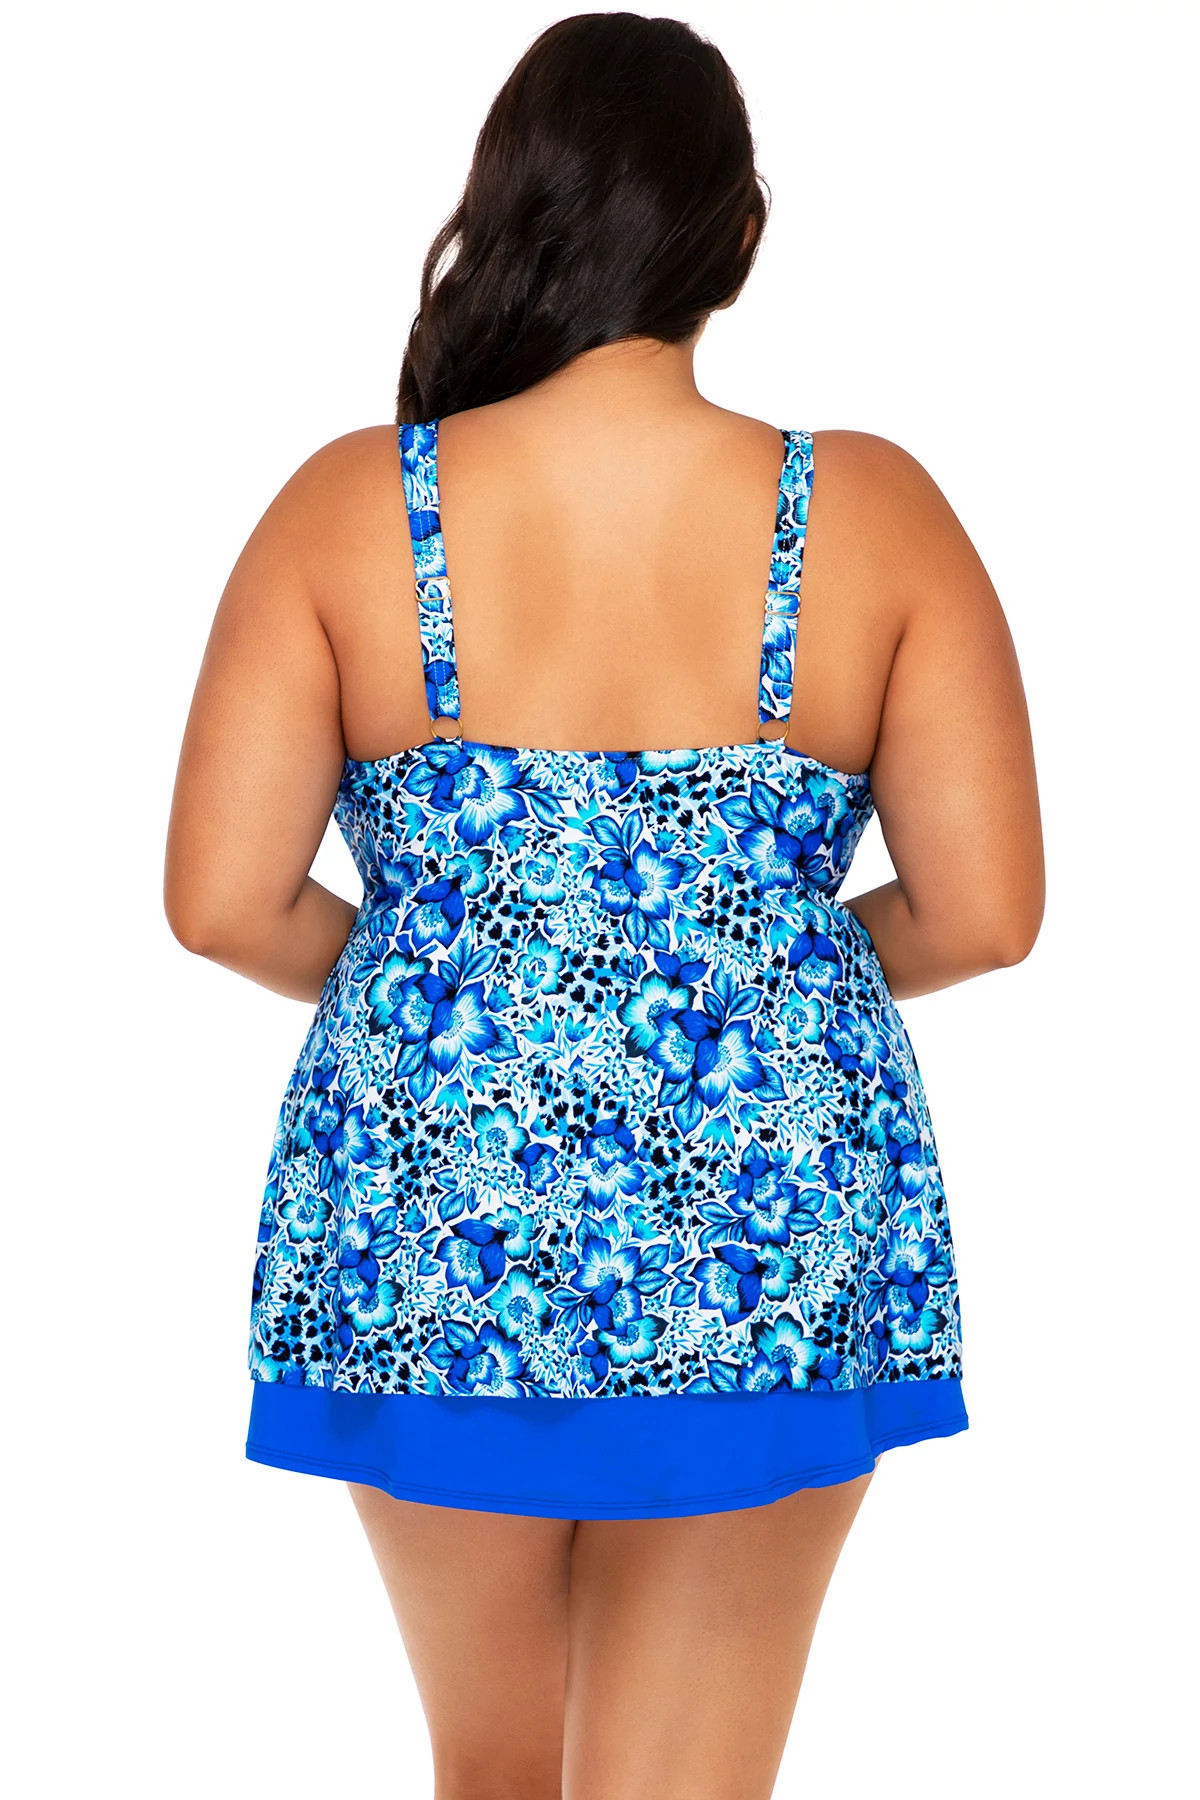 BAY BLUES Amelia Over The Shoulder Tankini Top image number 2